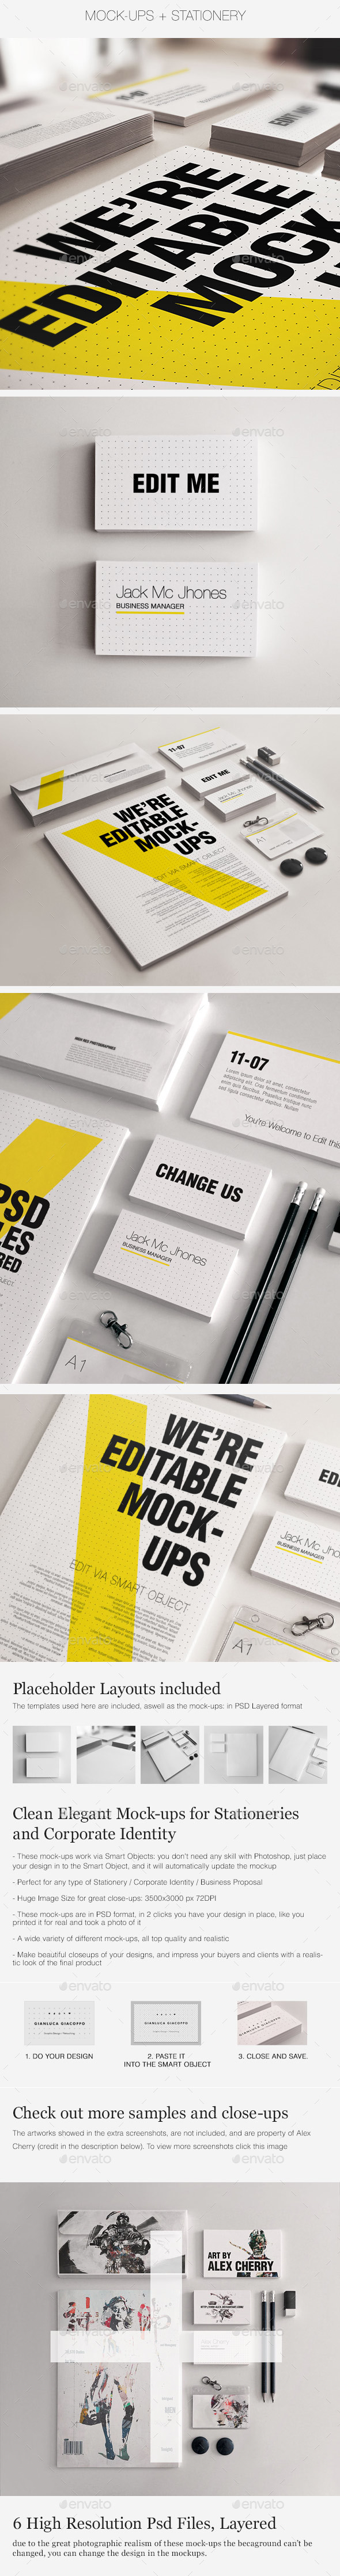 Realistic Stationery Mock-up Set 3- Corporate ID